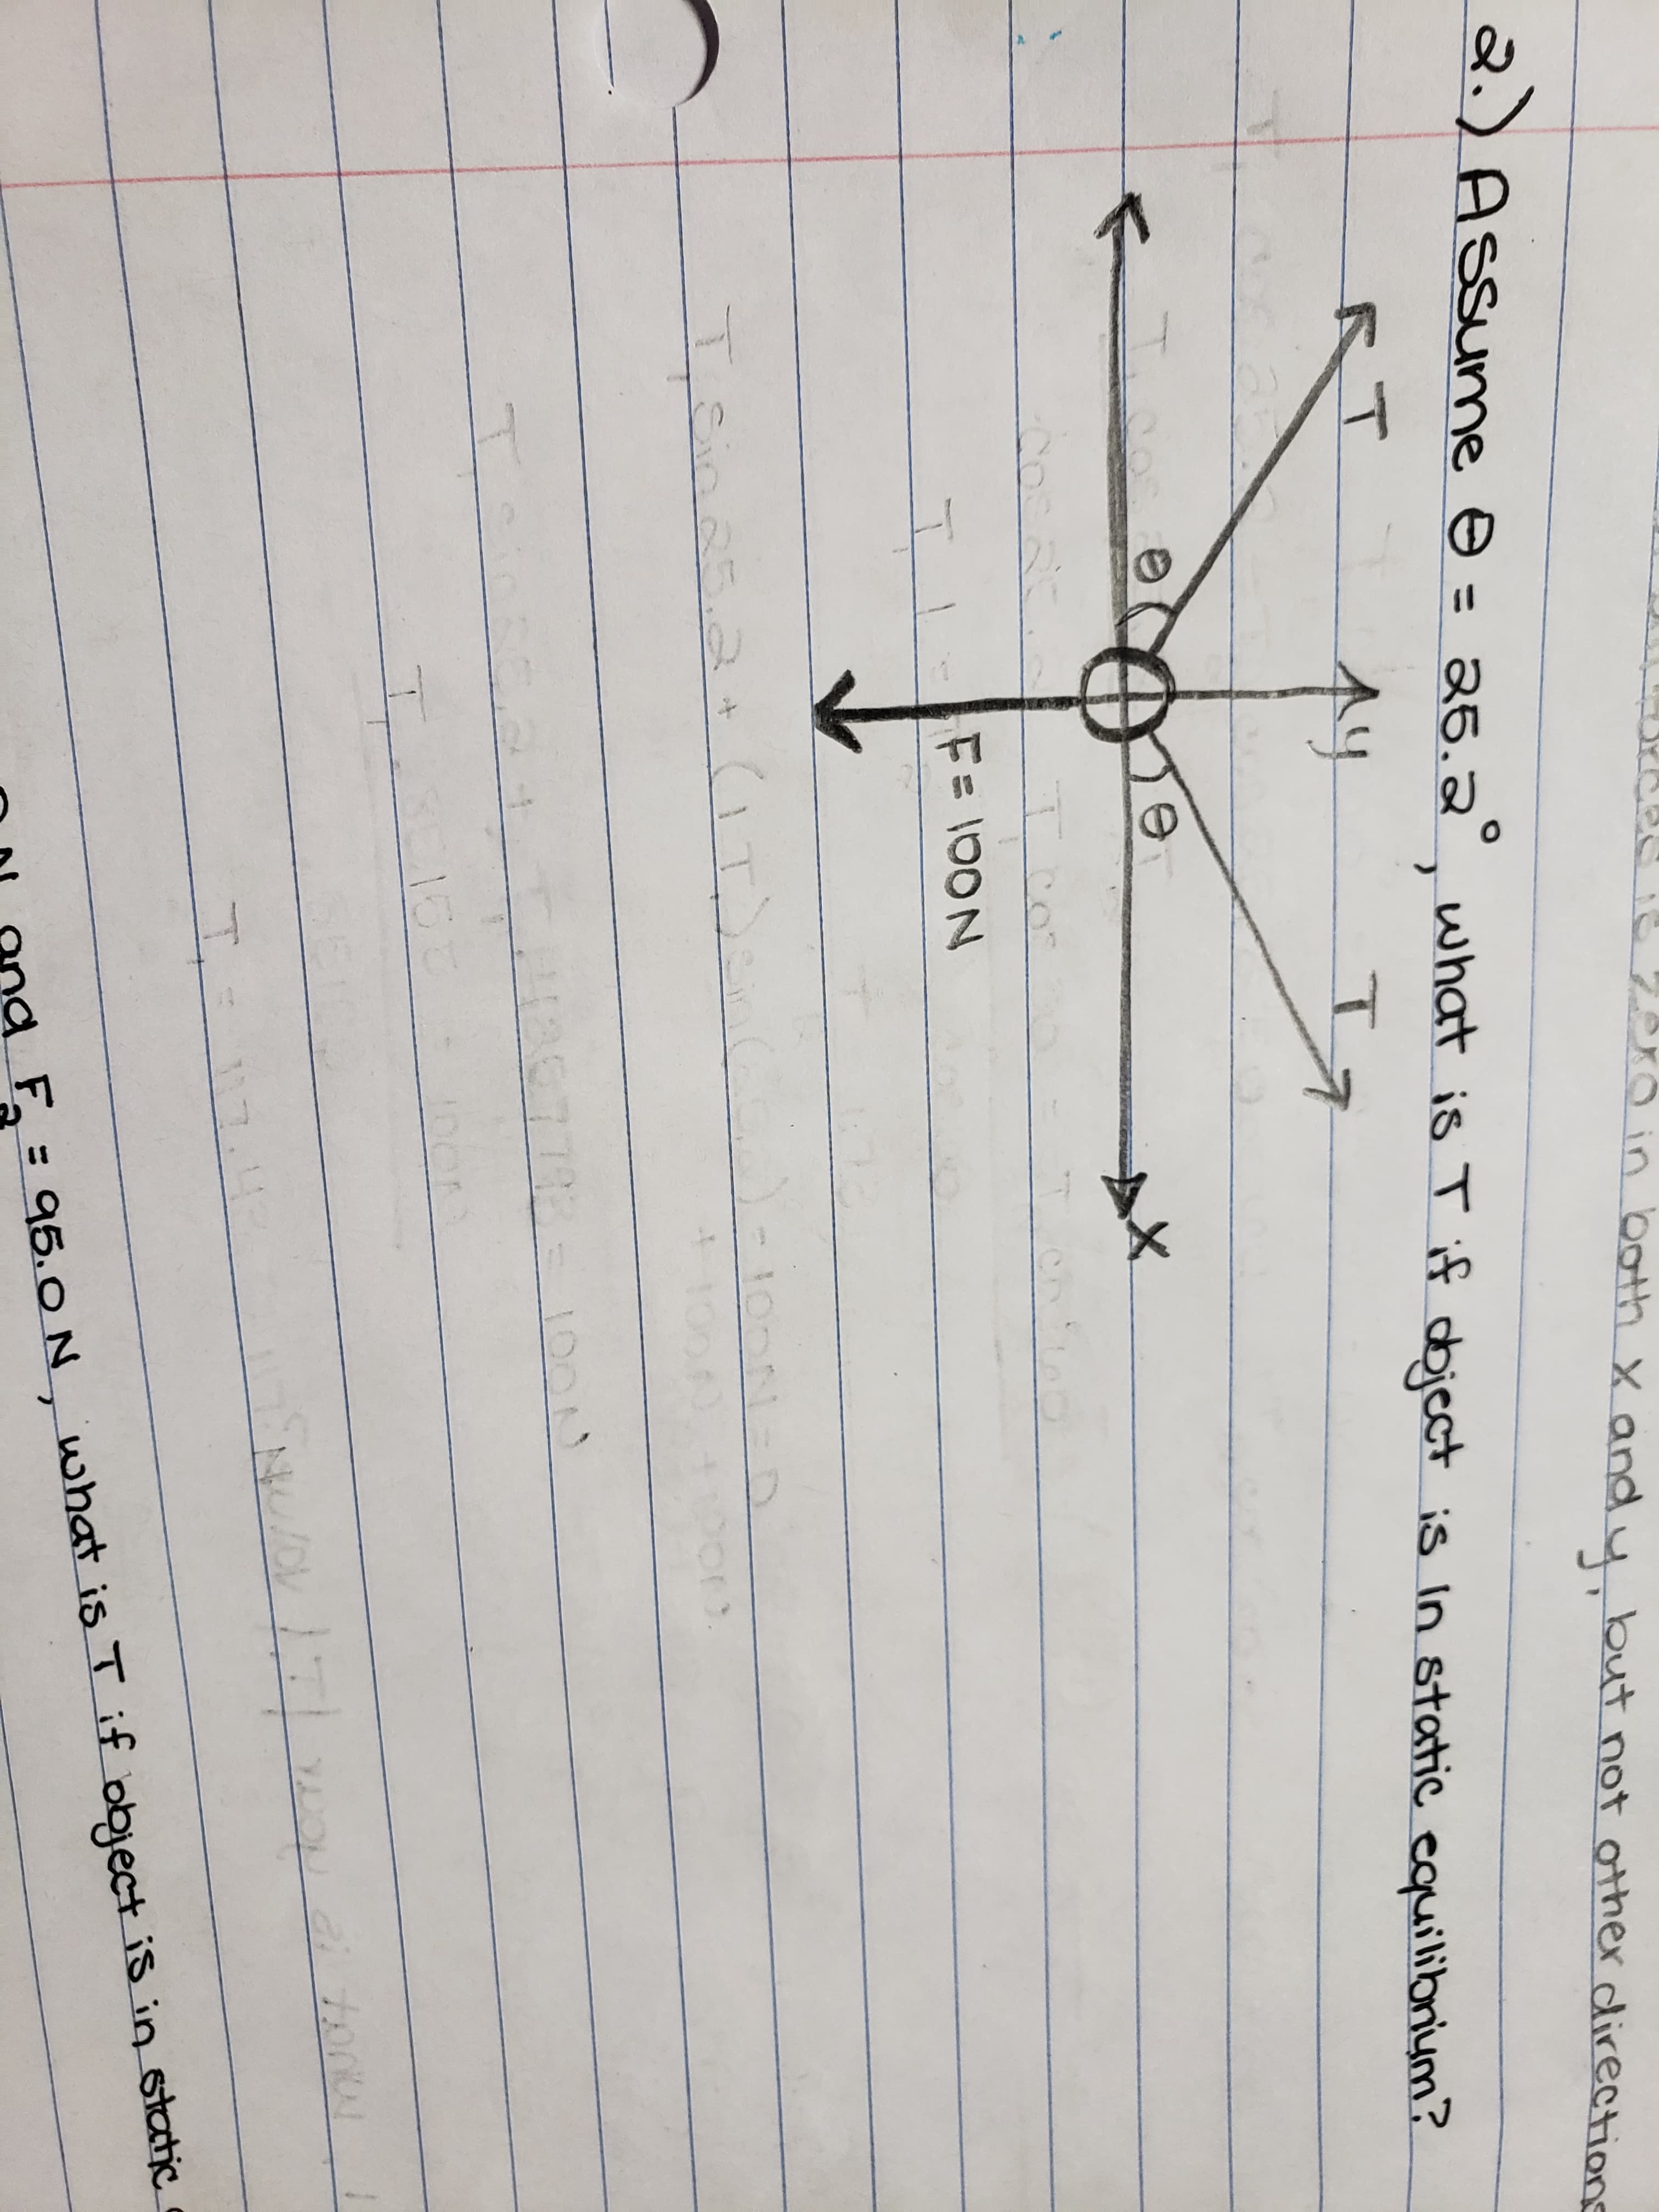 Assume e = 25.2 what is T if objcct
is In static equilibrym?
%3D
A4
